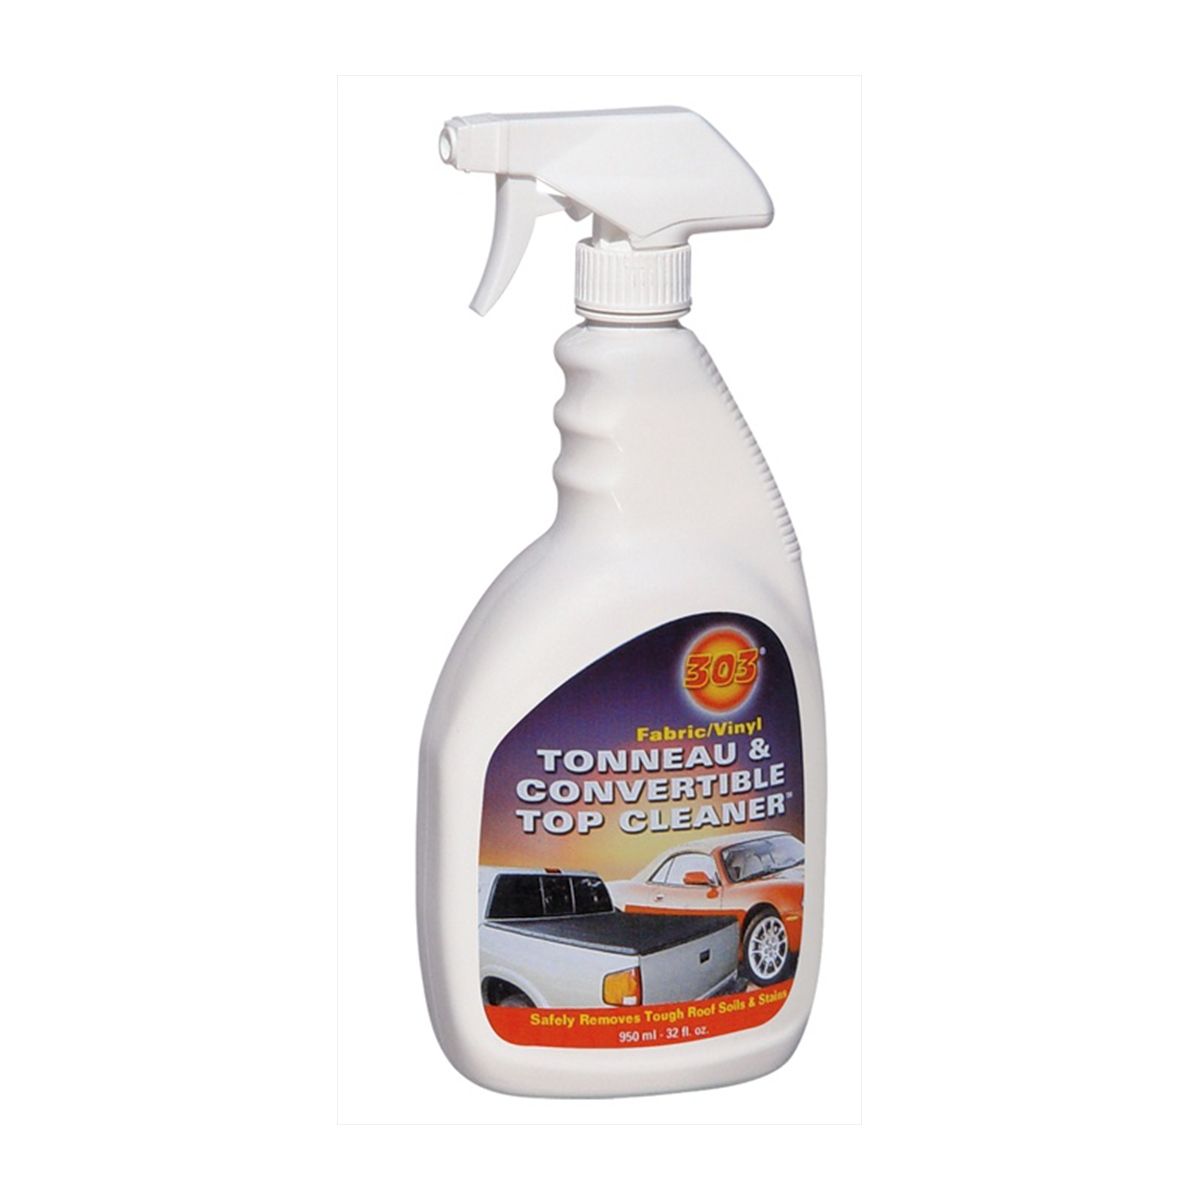 Convertible Top Care Products. 303 convertible top care and